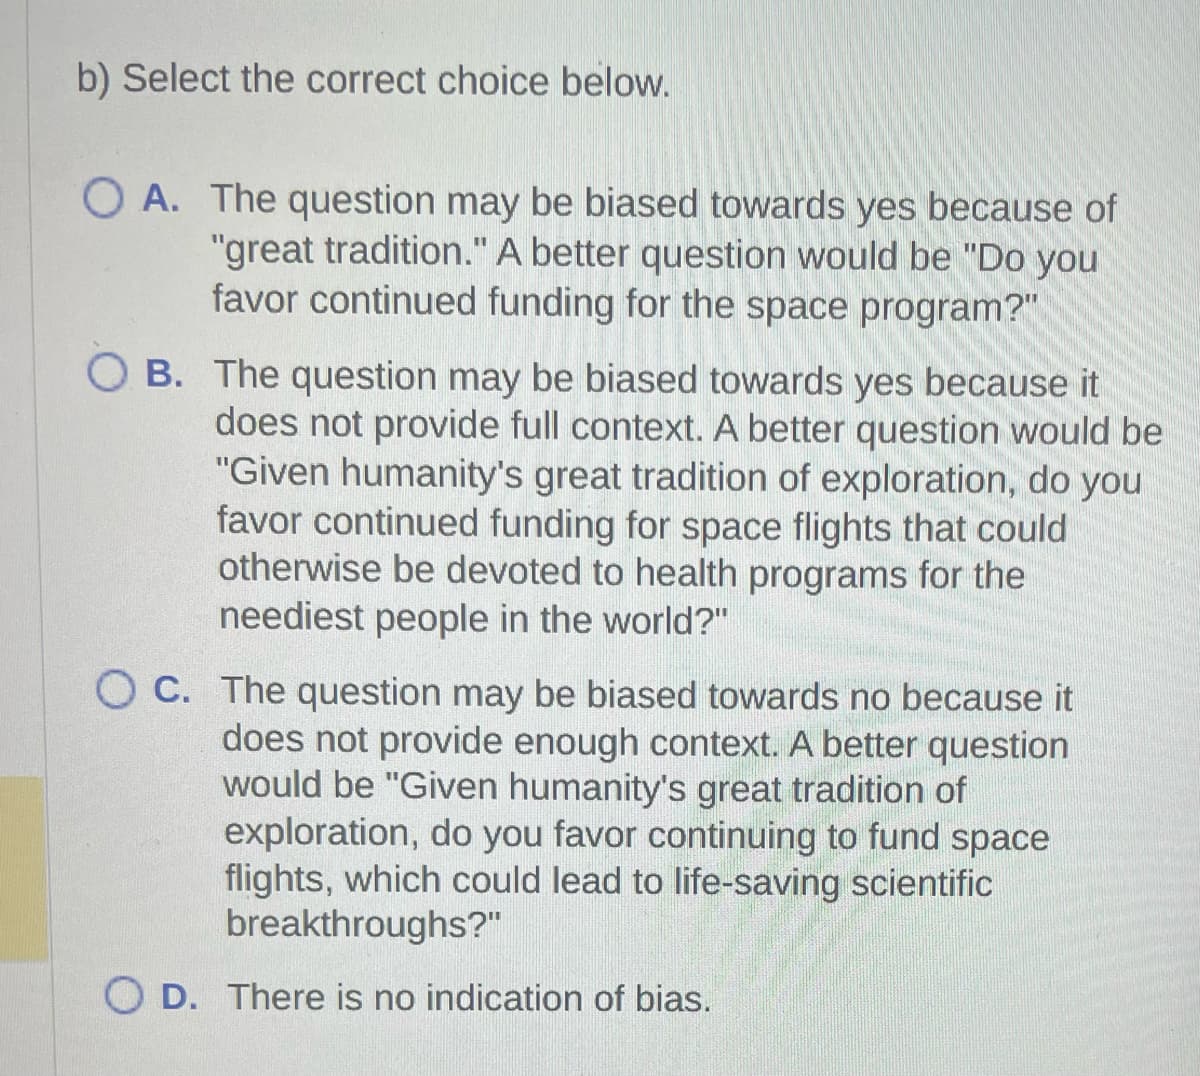 b) Select the correct choice below.
OA. The question may be biased towards yes because of
"great tradition." A better question would be "Do you
favor continued funding for the space program?"
OB. The question may be biased towards yes because it
does not provide full context. A better question would be
"Given humanity's great tradition of exploration, do you
favor continued funding for space flights that could
otherwise be devoted to health programs for the
neediest people in the world?"
OC. The question may be biased towards no because it
does not provide enough context. A better question
would be "Given humanity's great tradition of
exploration, do you favor continuing to fund space
flights, which could lead to life-saving scientific
breakthroughs?"
OD. There is no indication of bias.